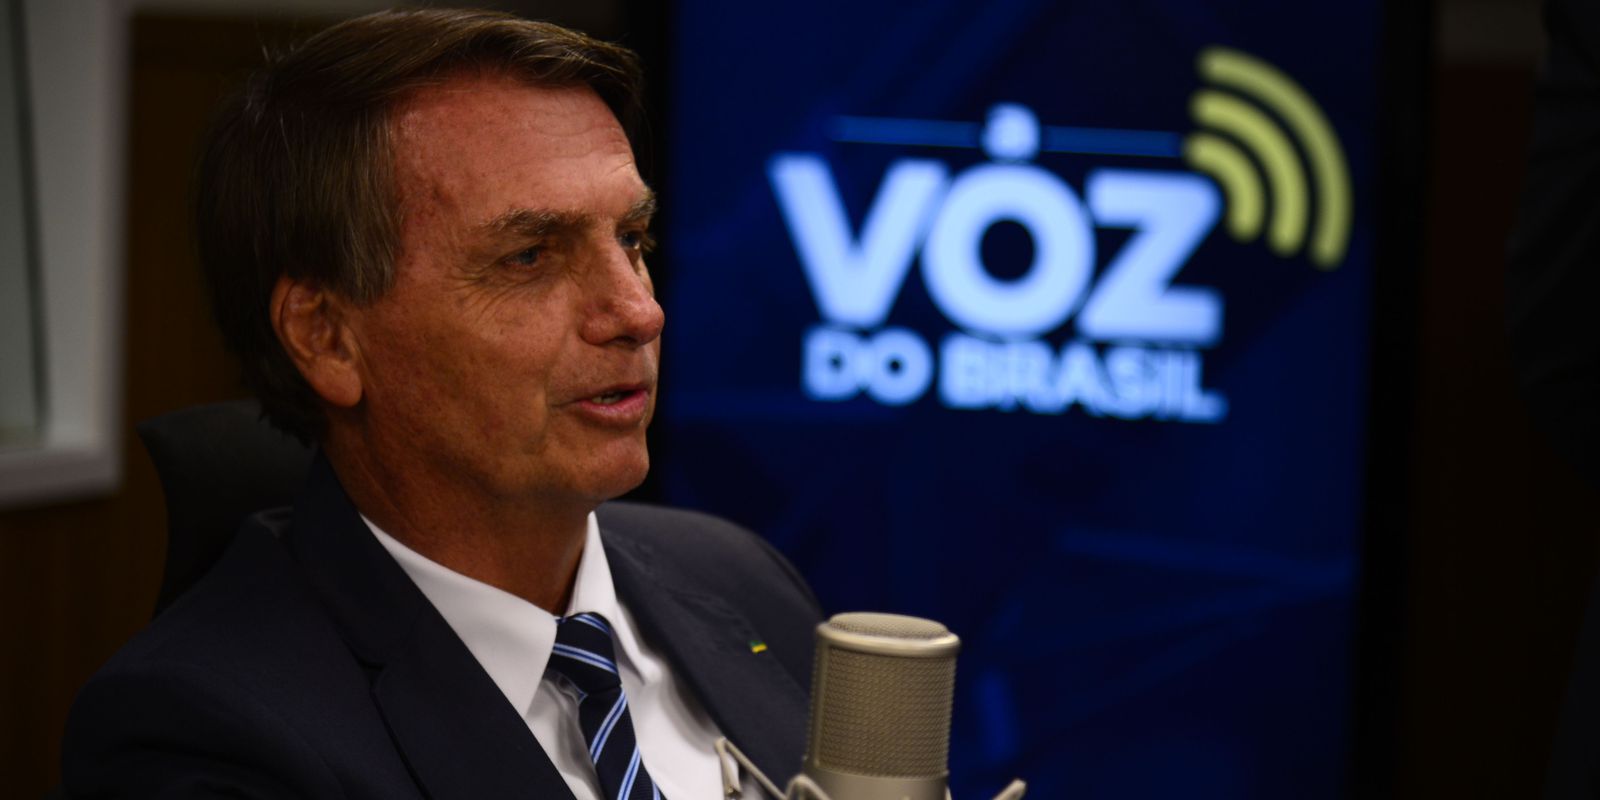 President Bolsonaro talks about Aid Brazil and priorities for 2022